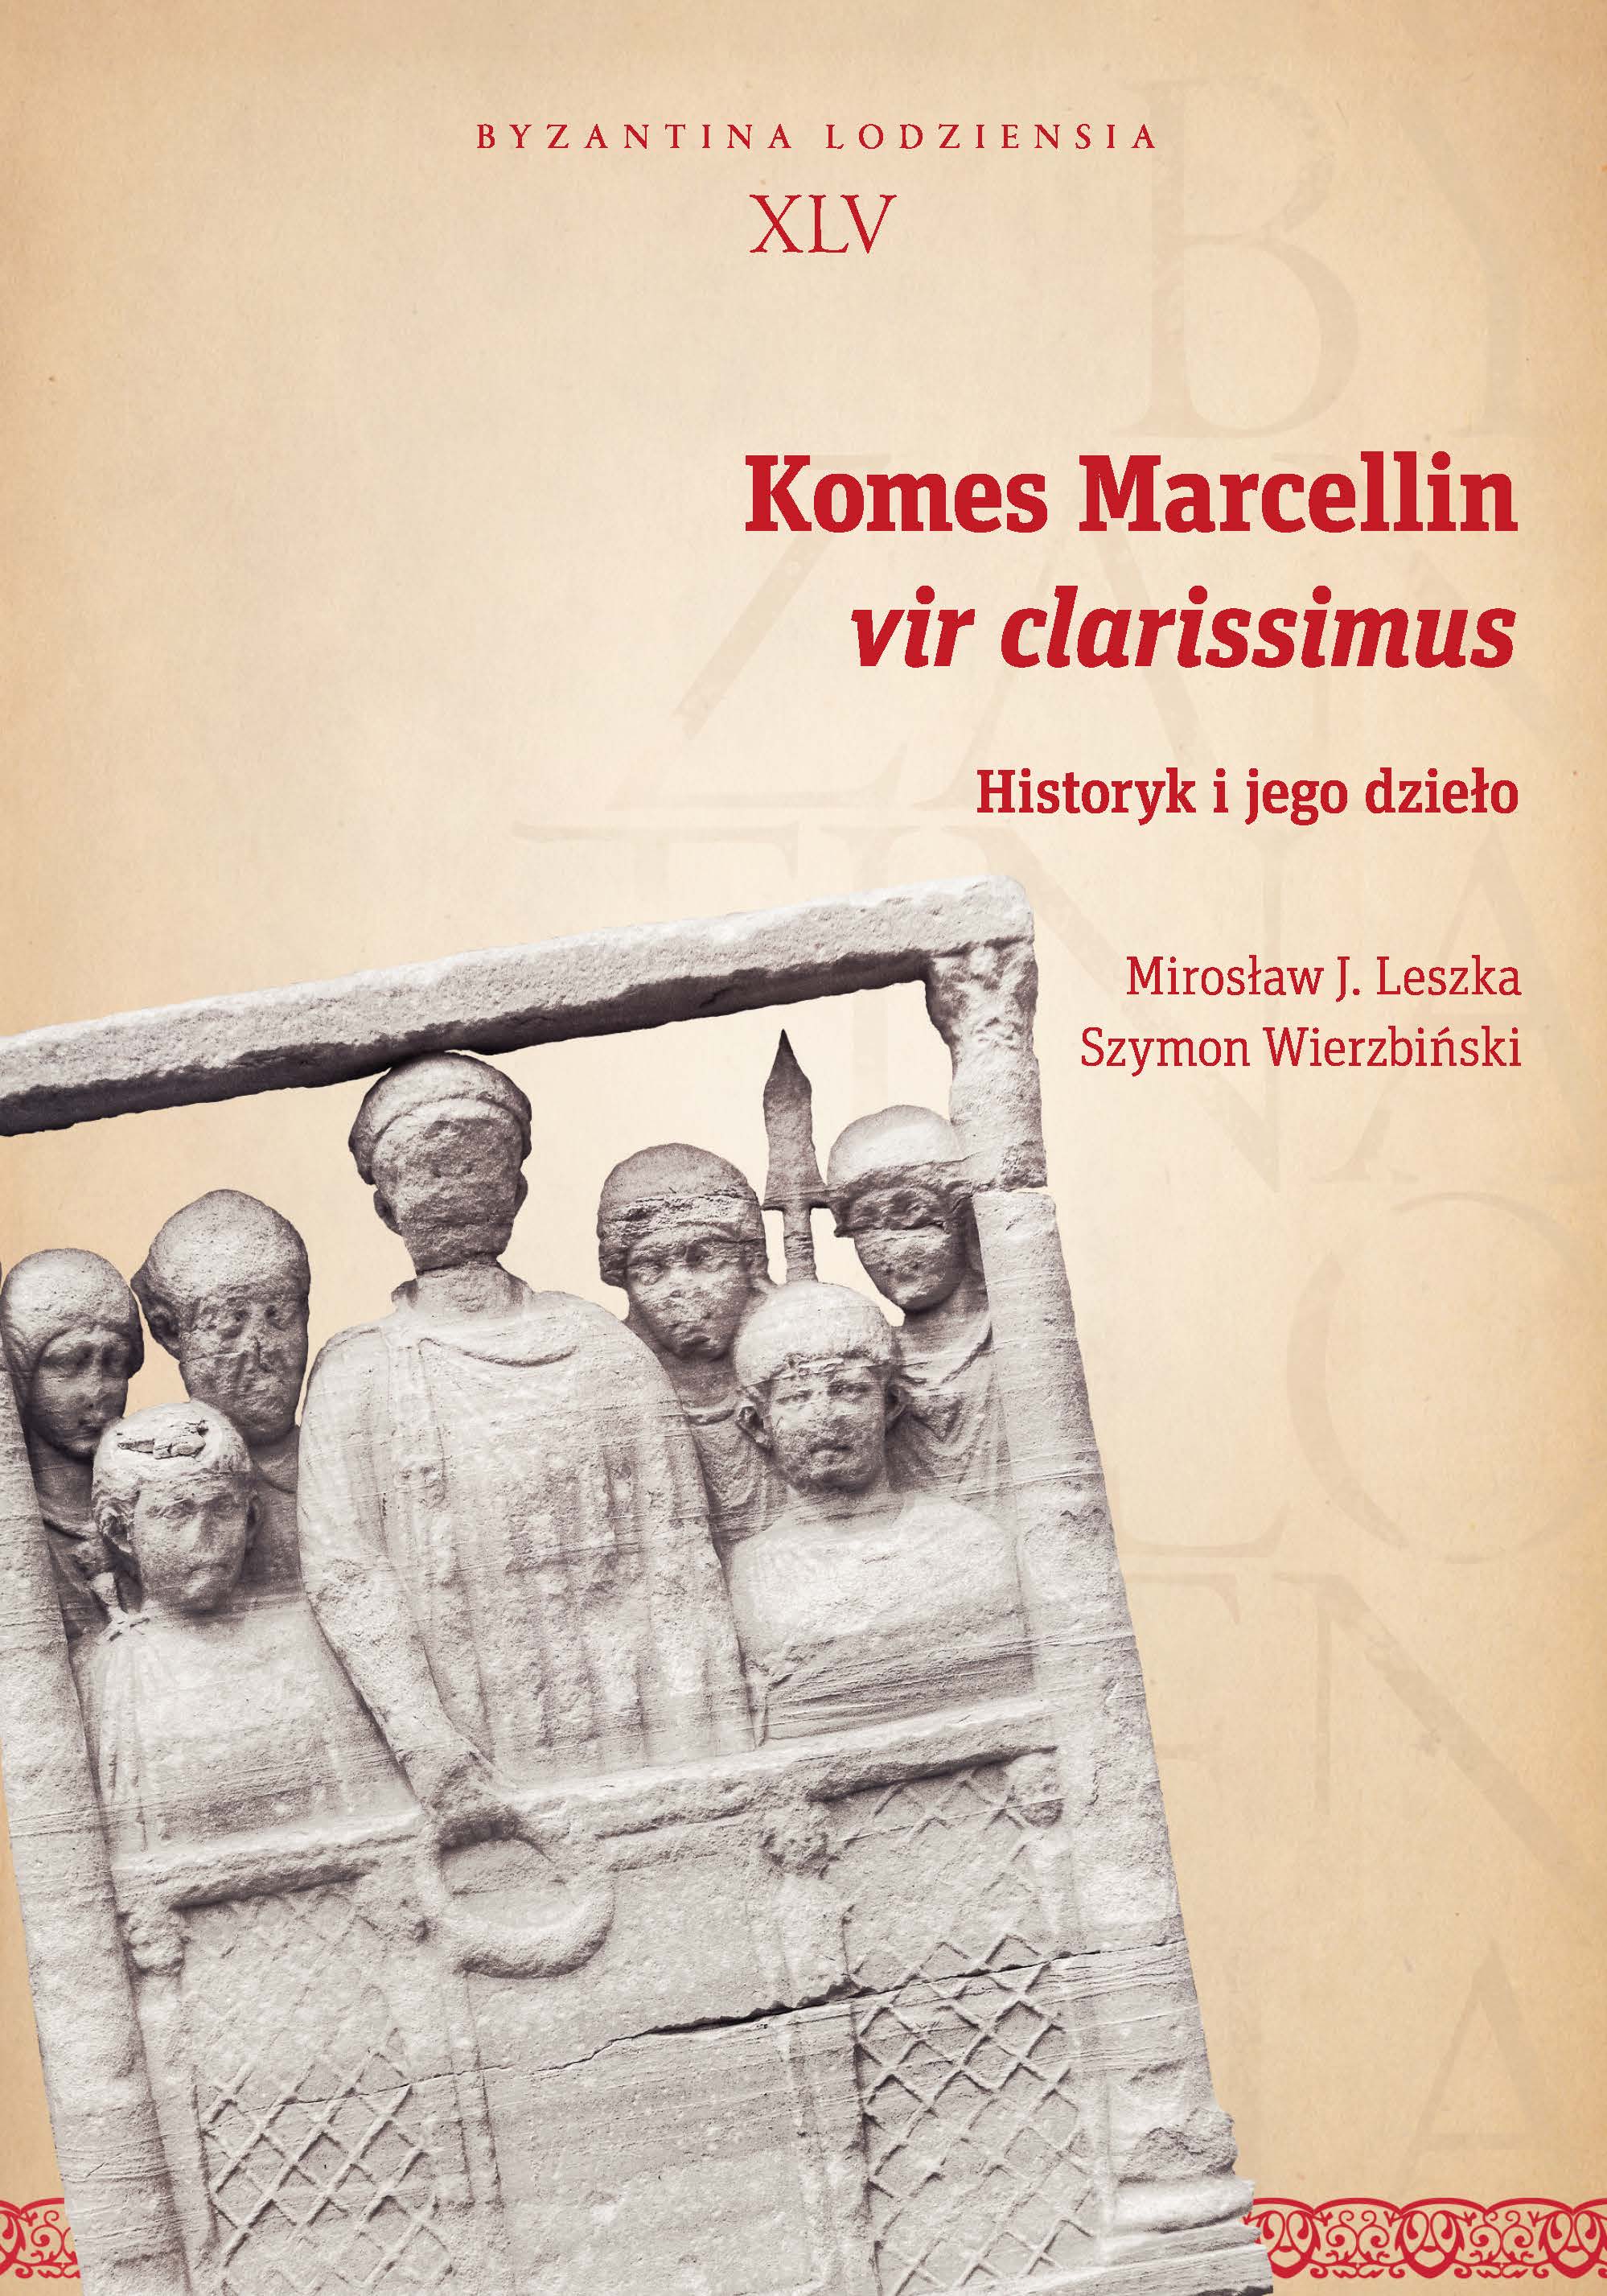 Comes Marcellinus, "vir clarissimus".  The Historian and his Work